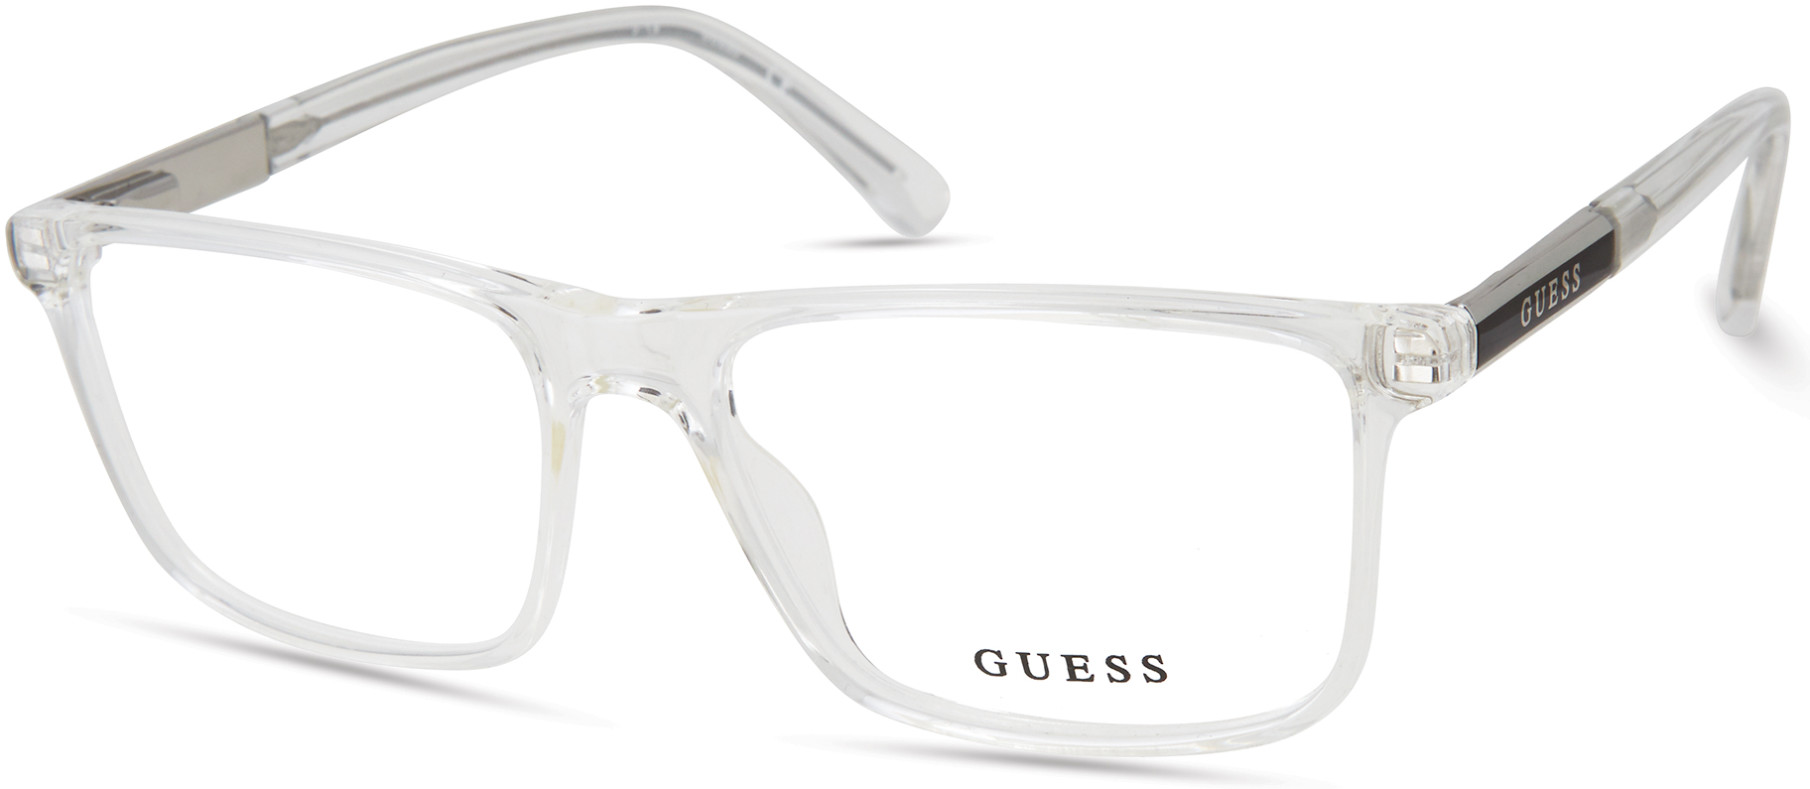 GUESS 1982 003